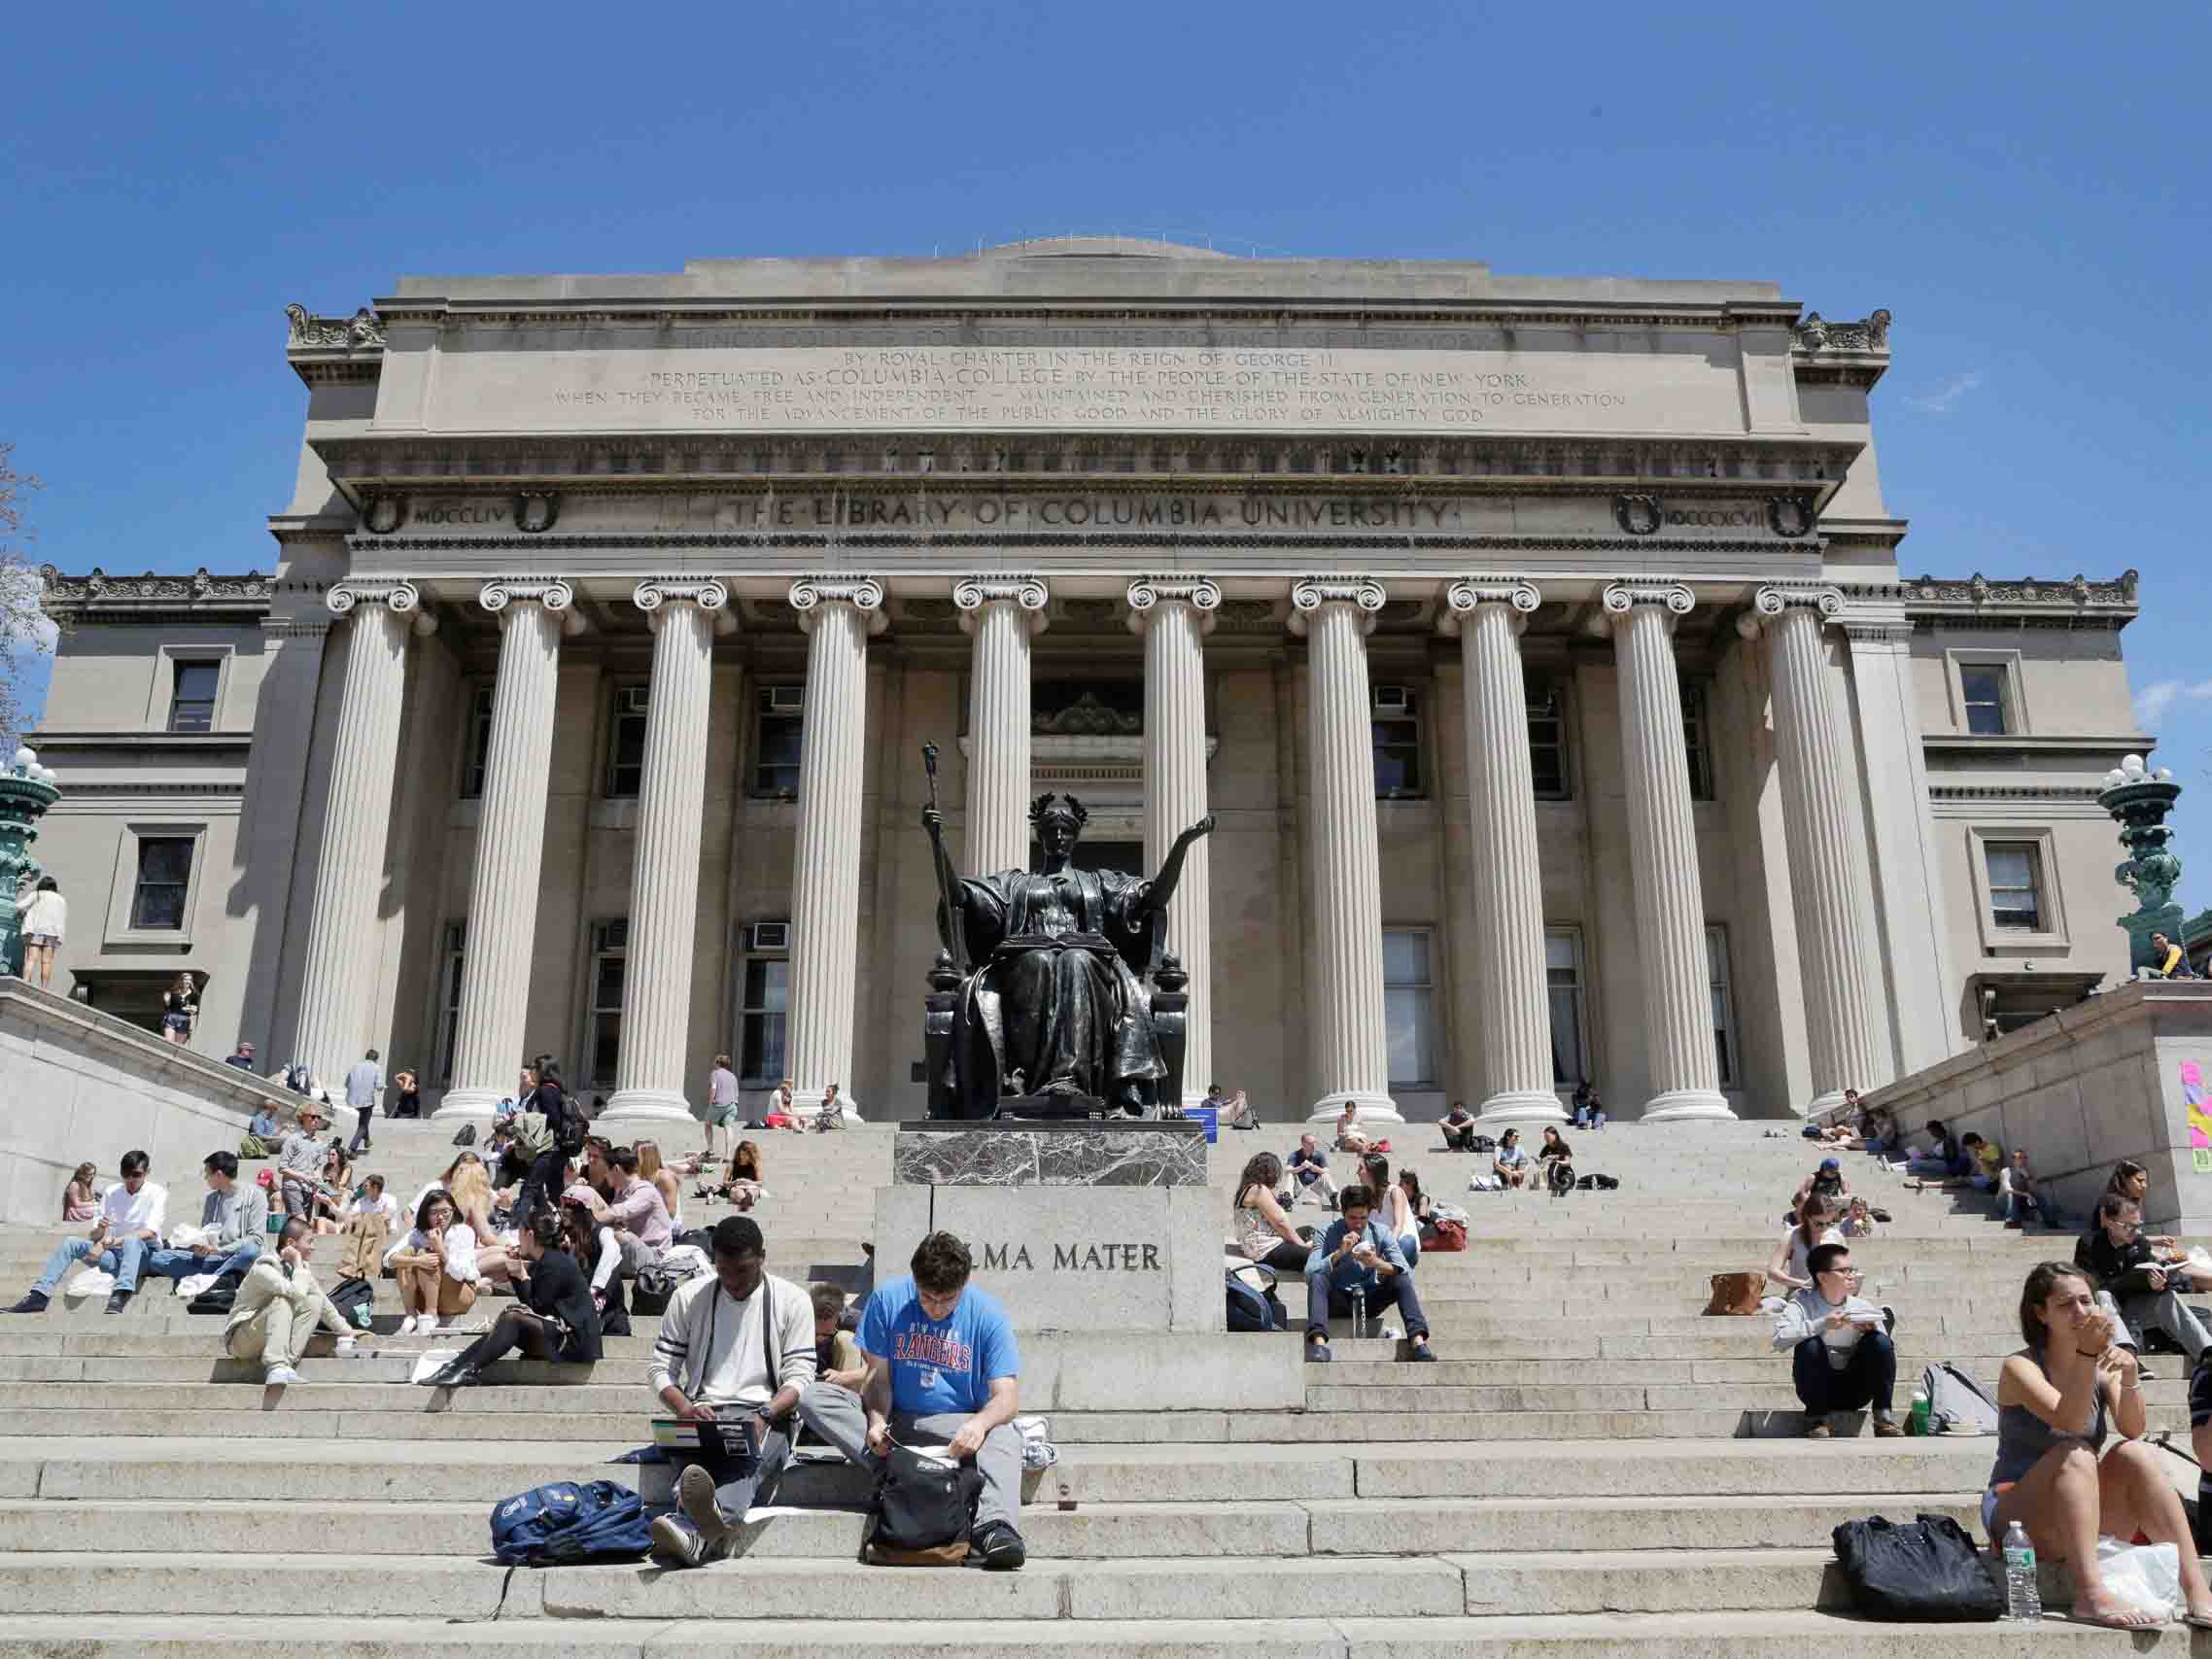 Columbia University (Columbia; officially Columbia University in the City of New York), established in 1754, is a private Ivy League research universi...